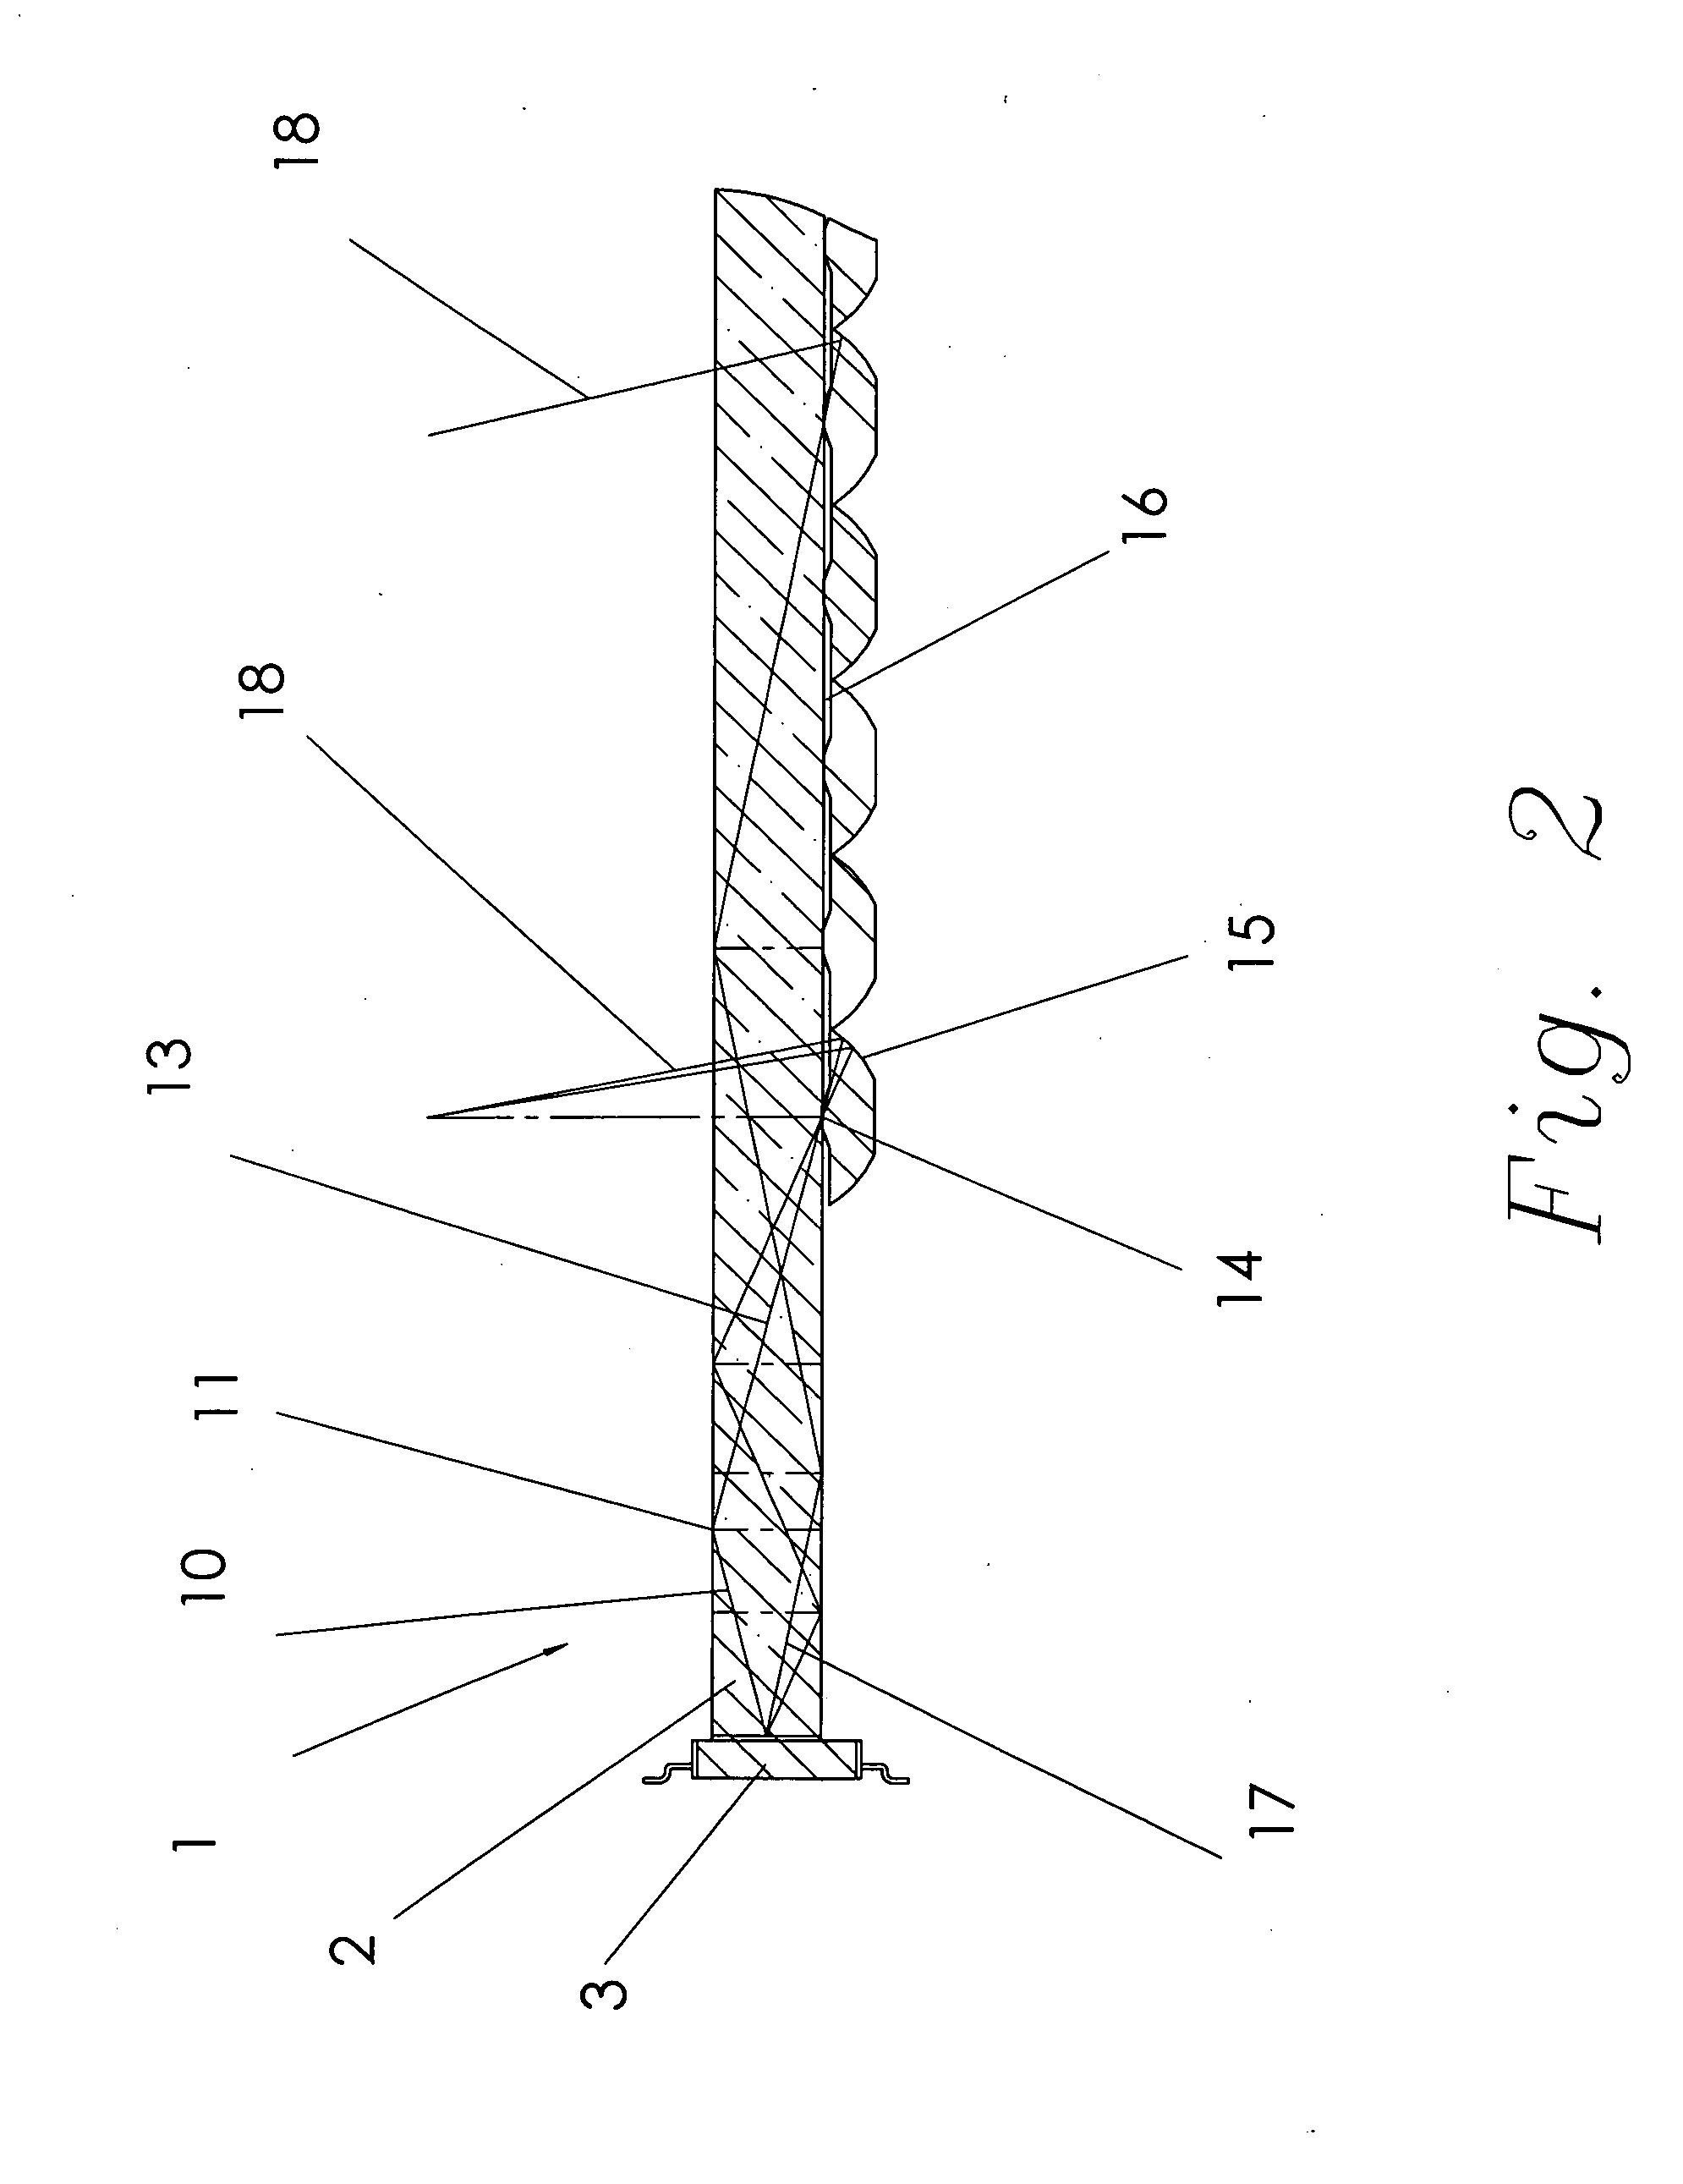 Optic system light guide with controlled output